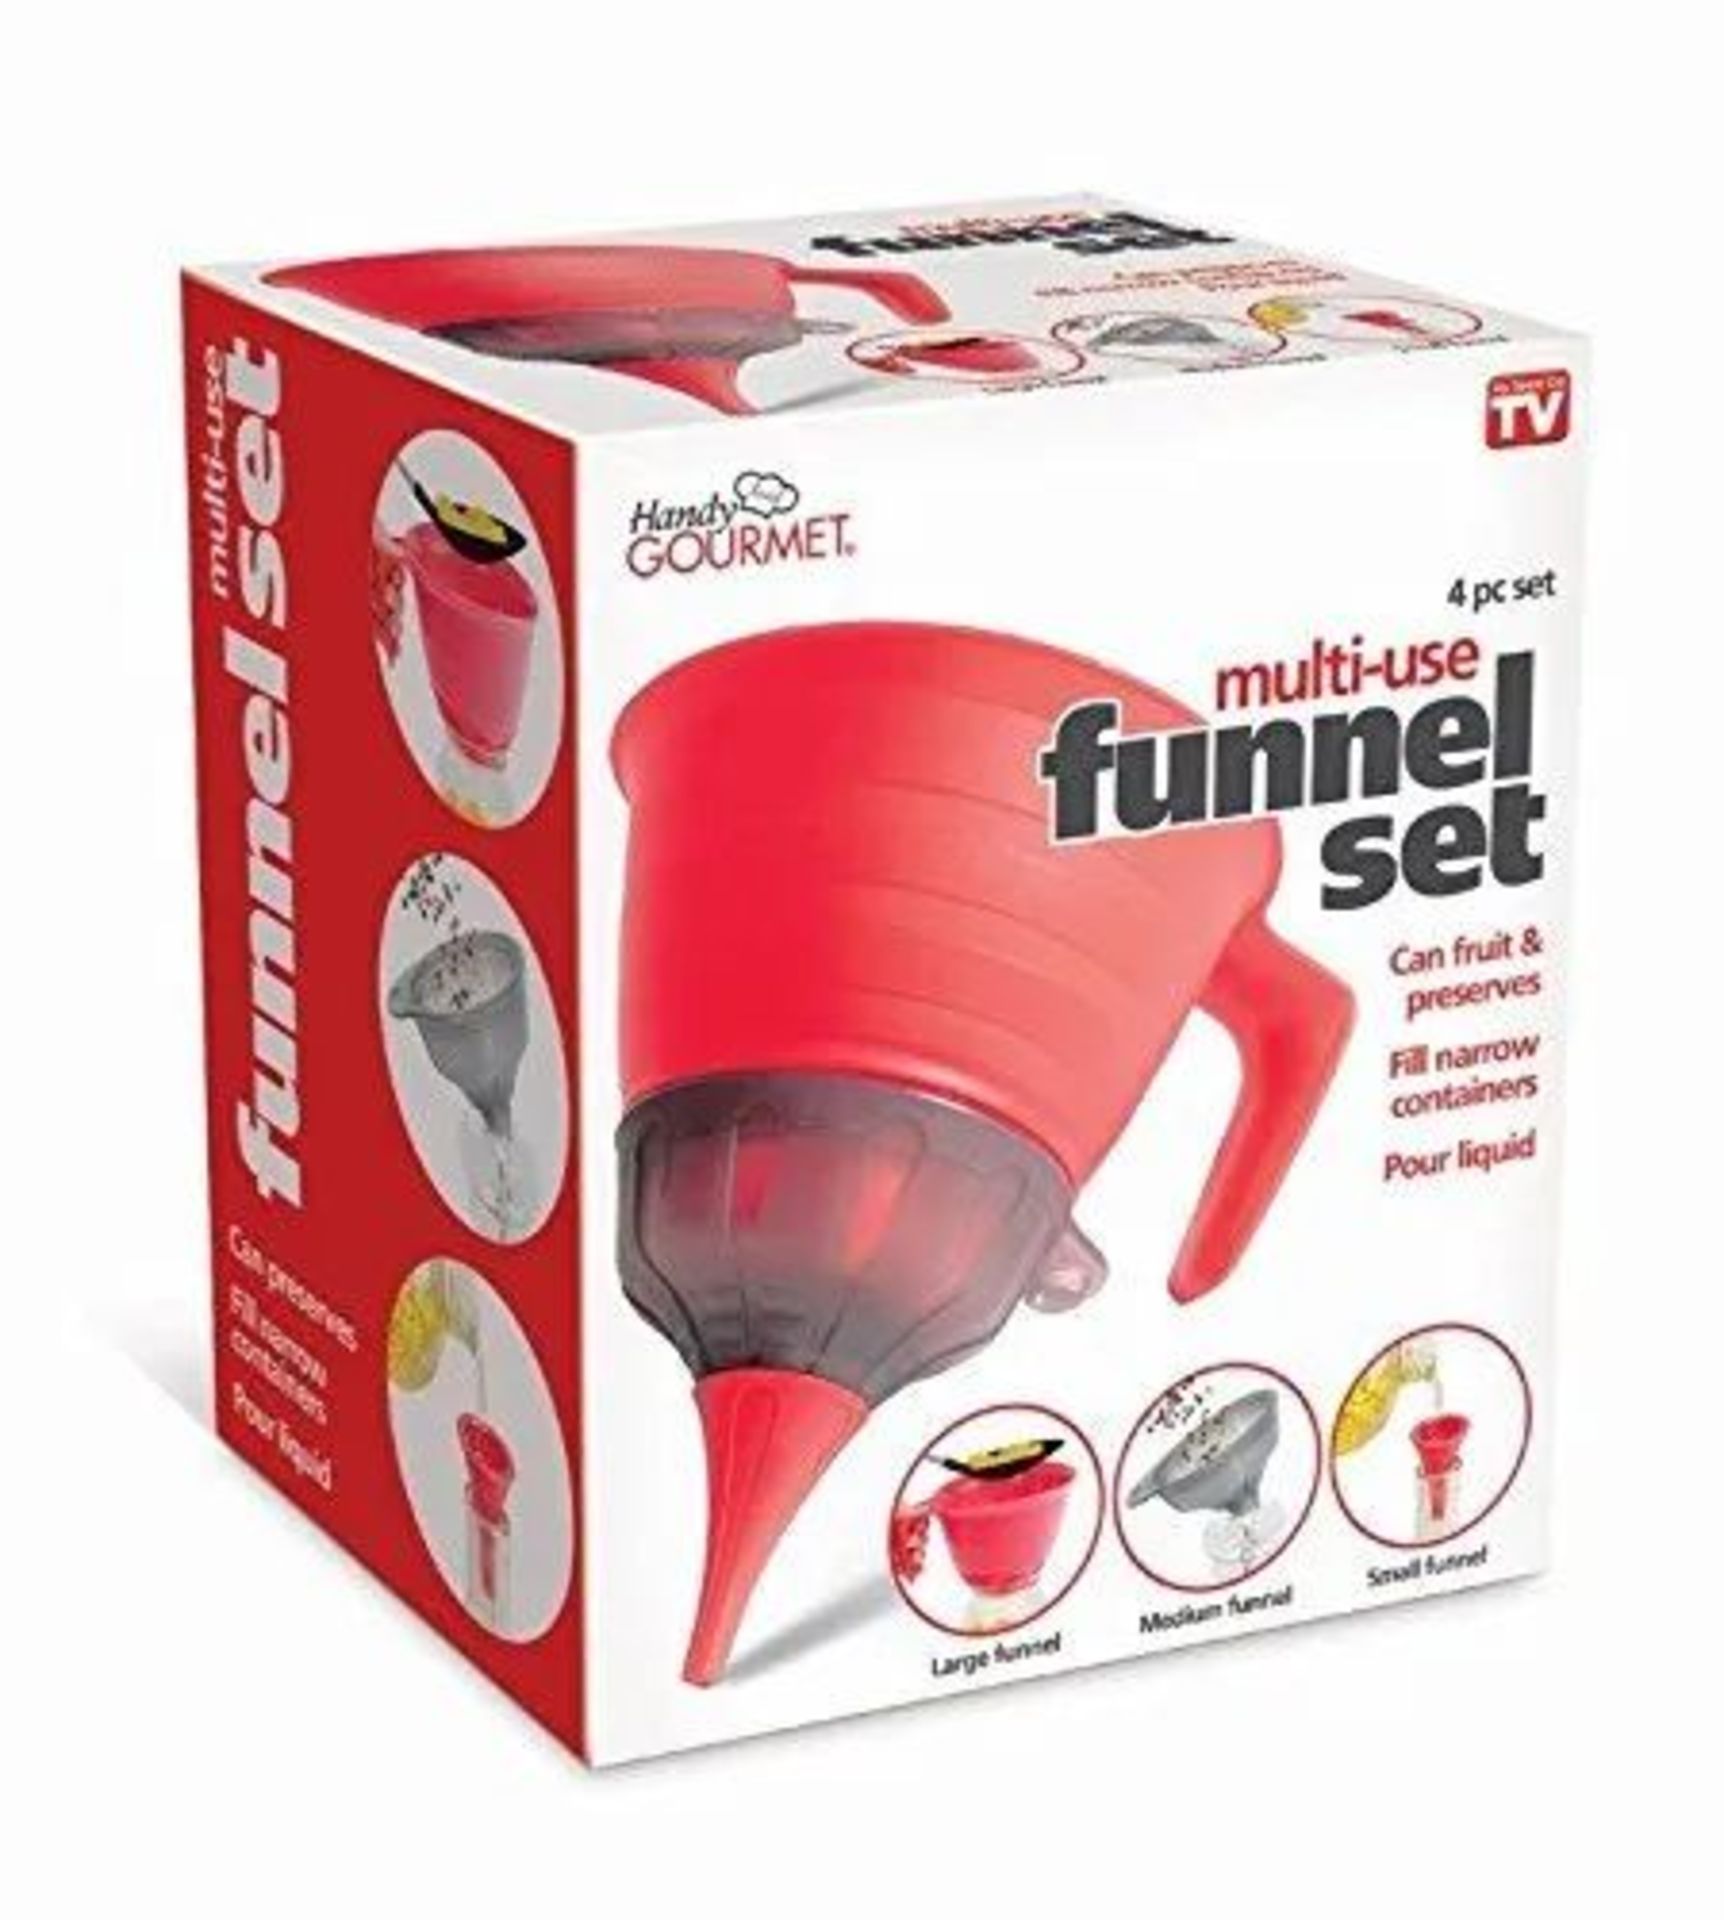 50x BRAND NEW 3 in 1 Small Medium Large Kitchen Funnel Set. RRP £4.99 EACH. A great kitchen